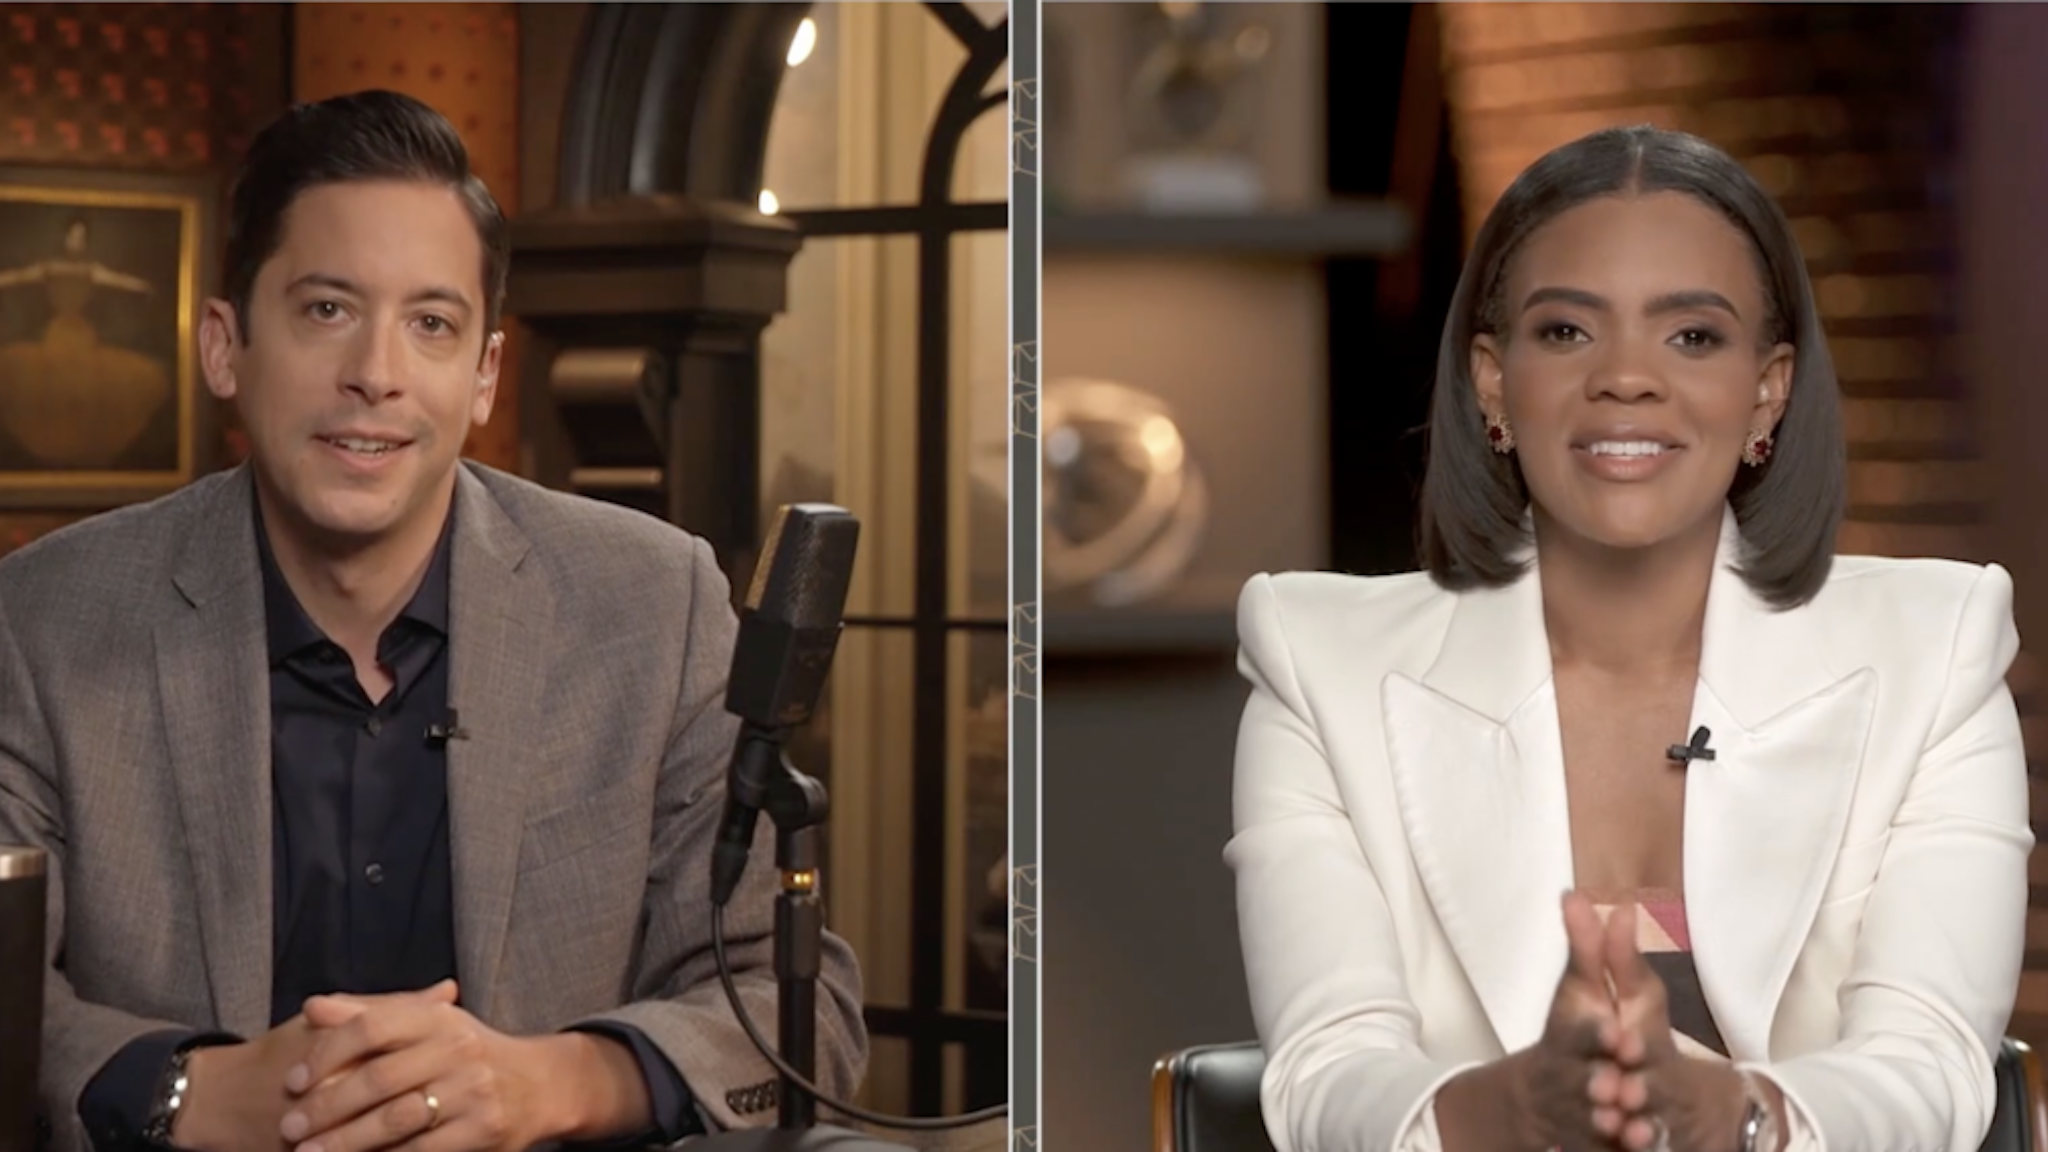 Michael Knowles/Candace Owens